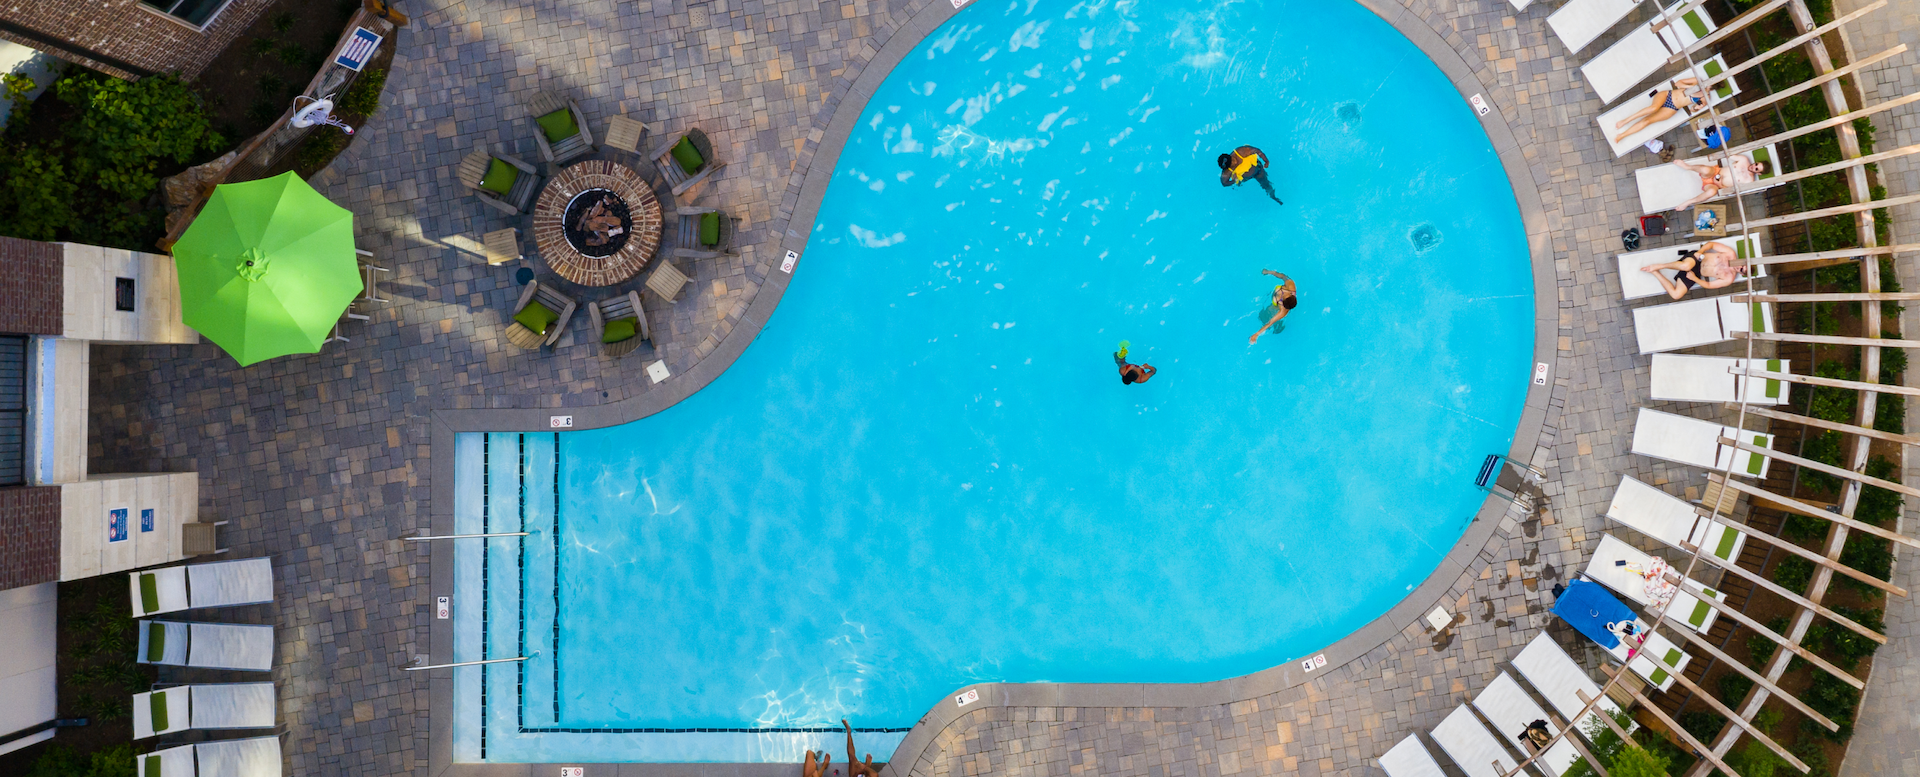 Birds-eye view of a pool